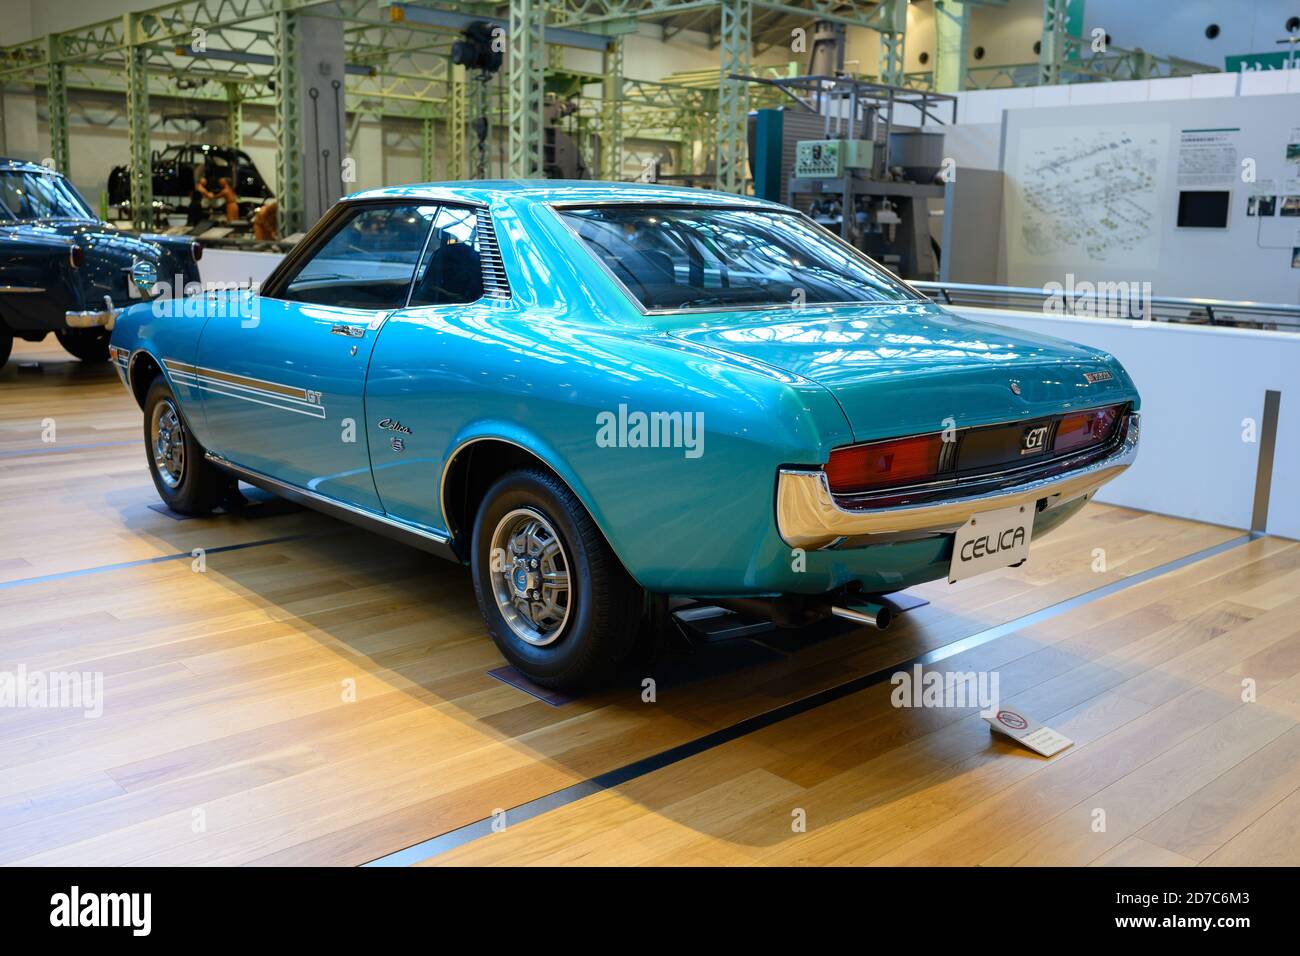 Nagoya / Japan Nov 26 2019 :  Classic sports car model Celica parked in the hall of the Memorial Museum of Industry and Technology. Stock Photo